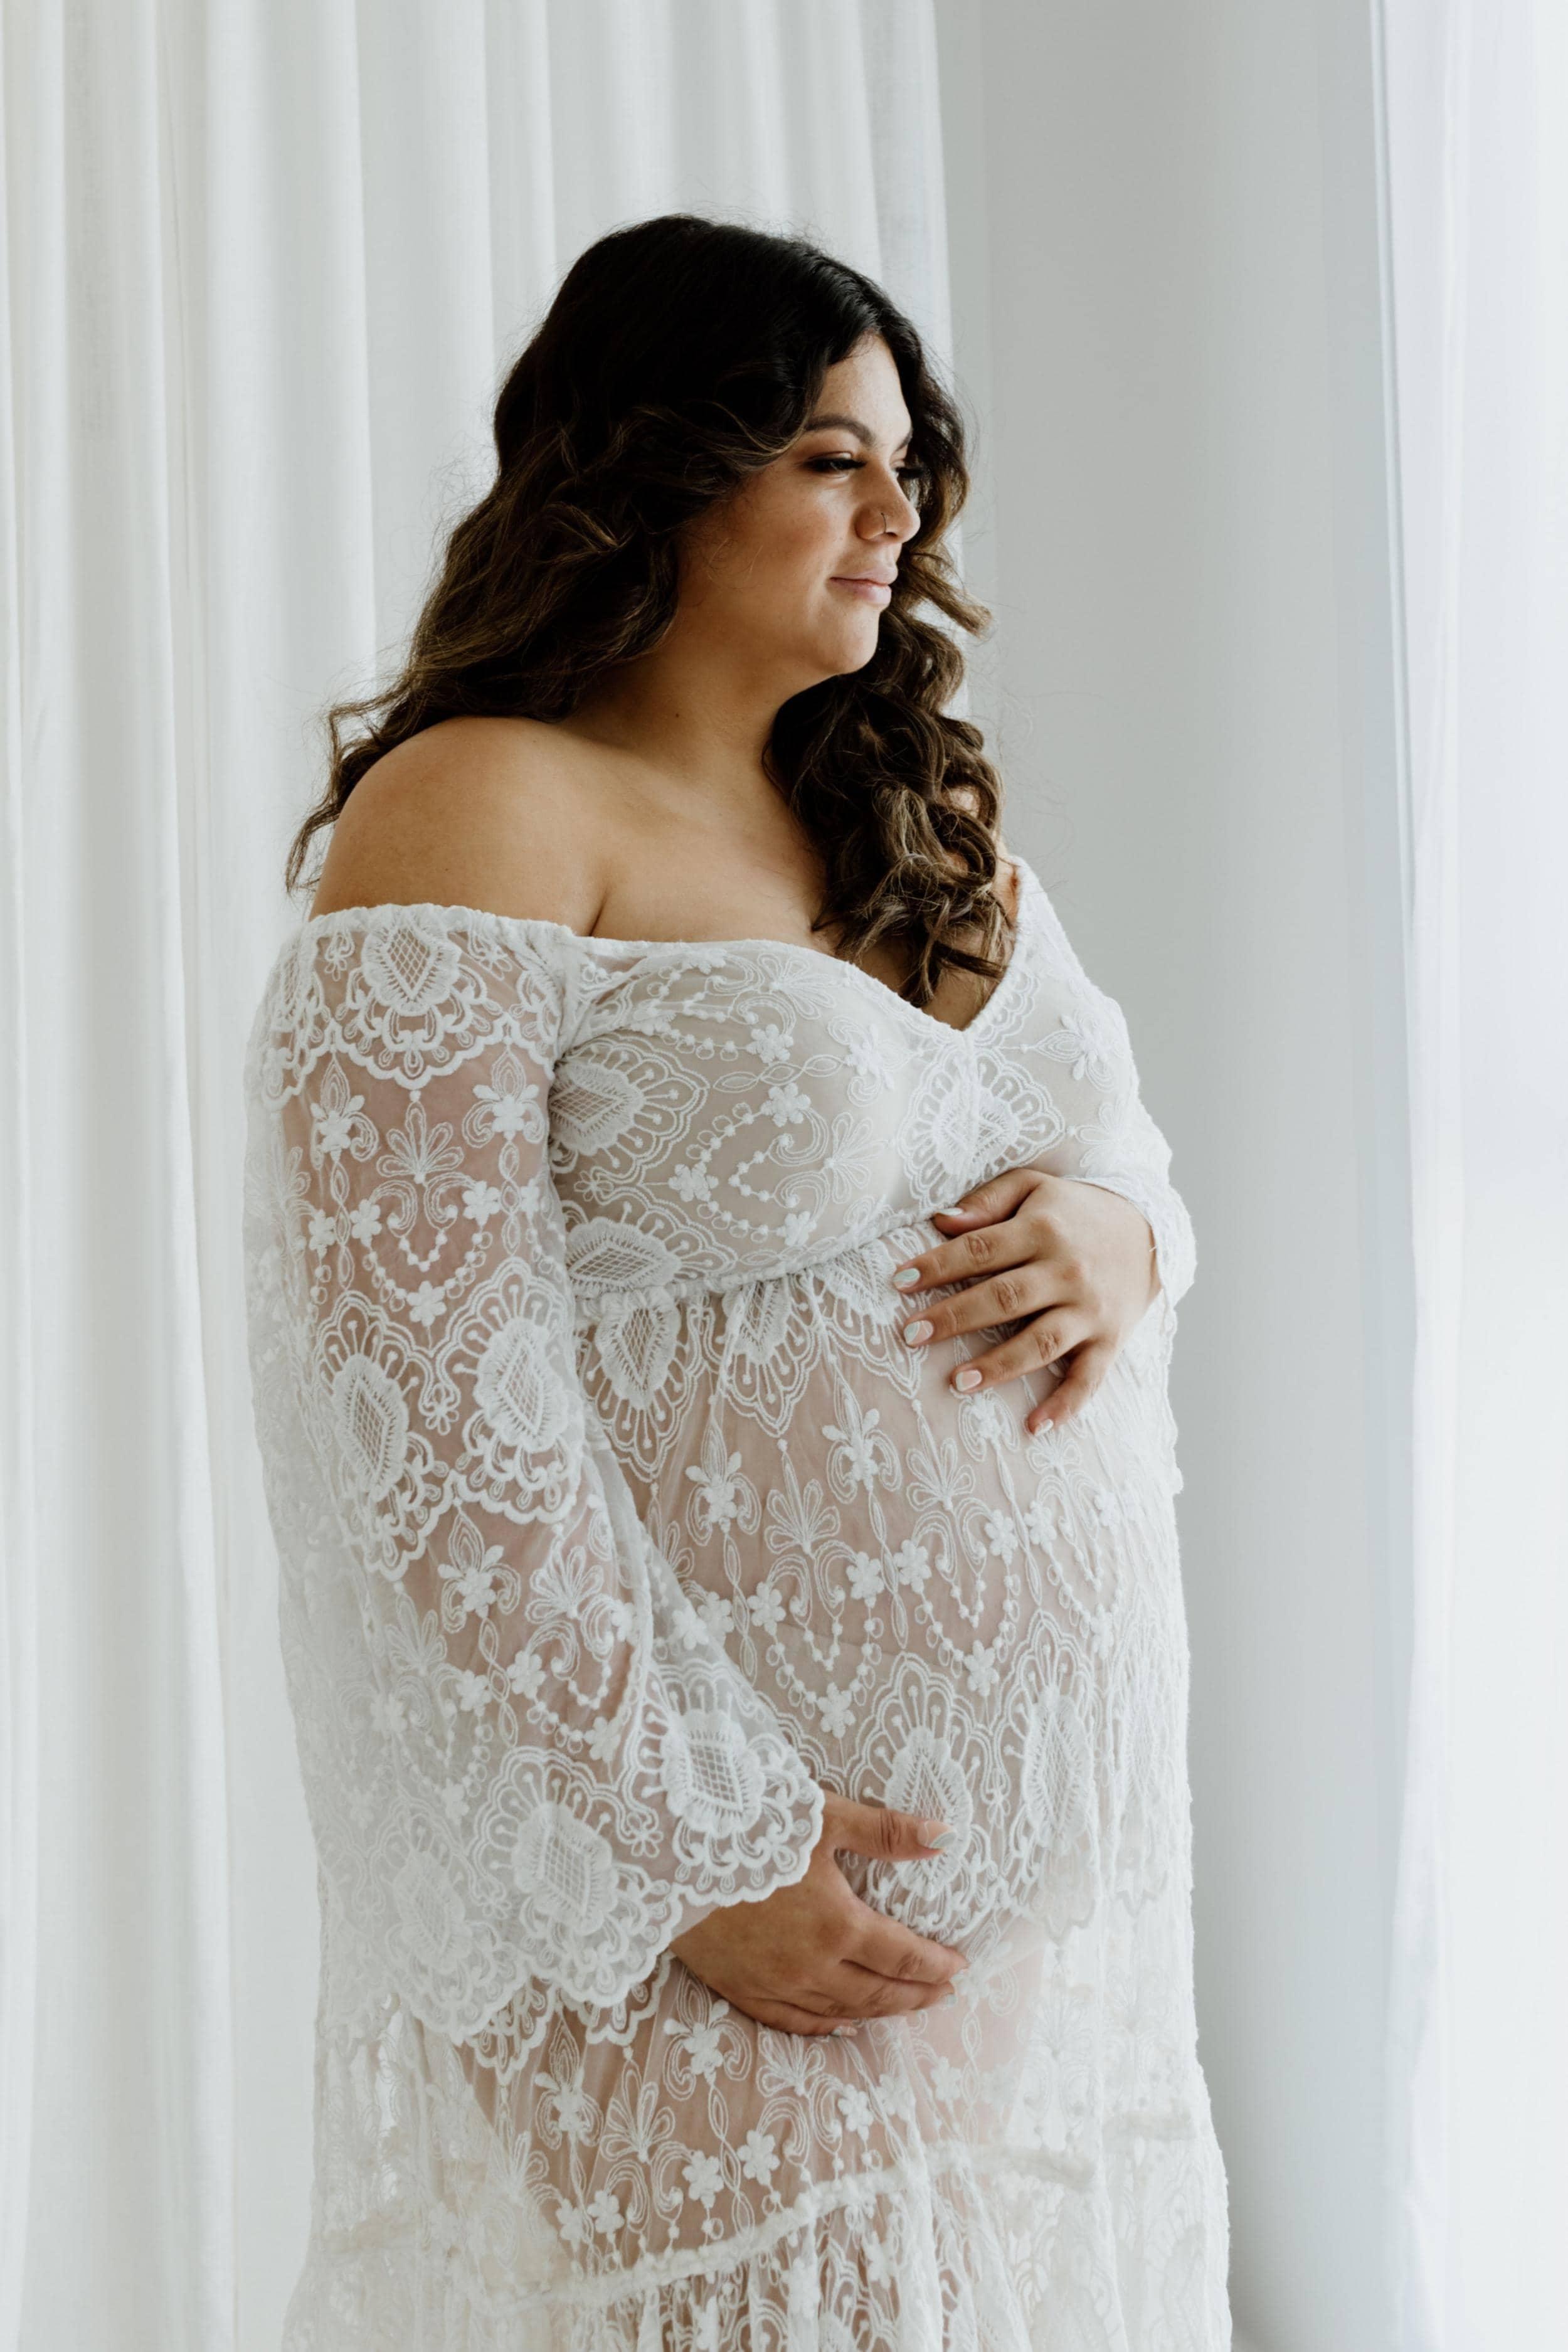 5 Elegant Maternity Dress Rentals For Your Baby Shower Or Maternity Shoot -  The Good Trade